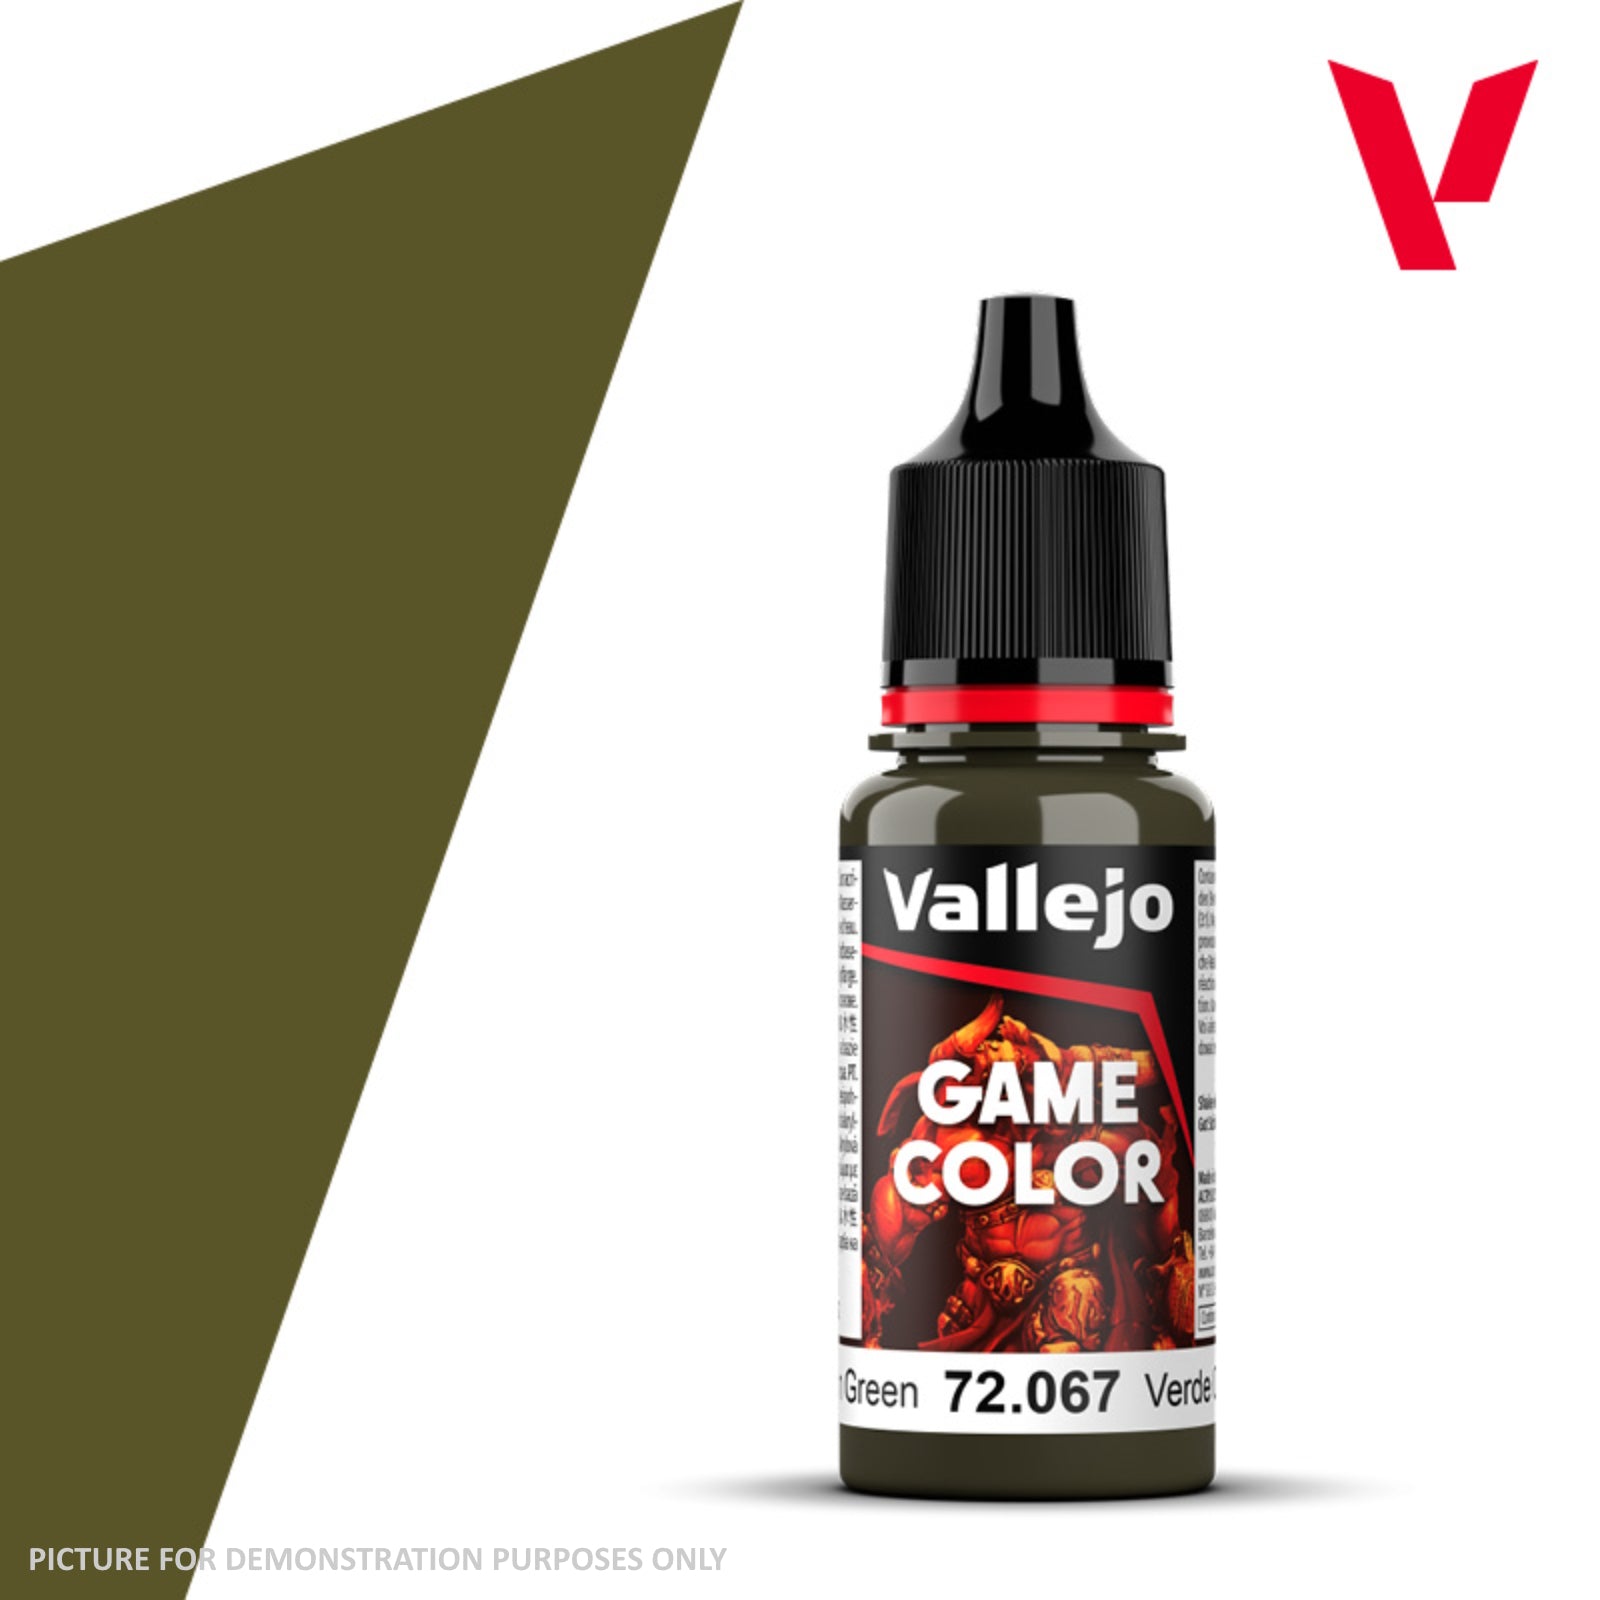 Vallejo Game Colour - 72.067 Cayman Green 18ml